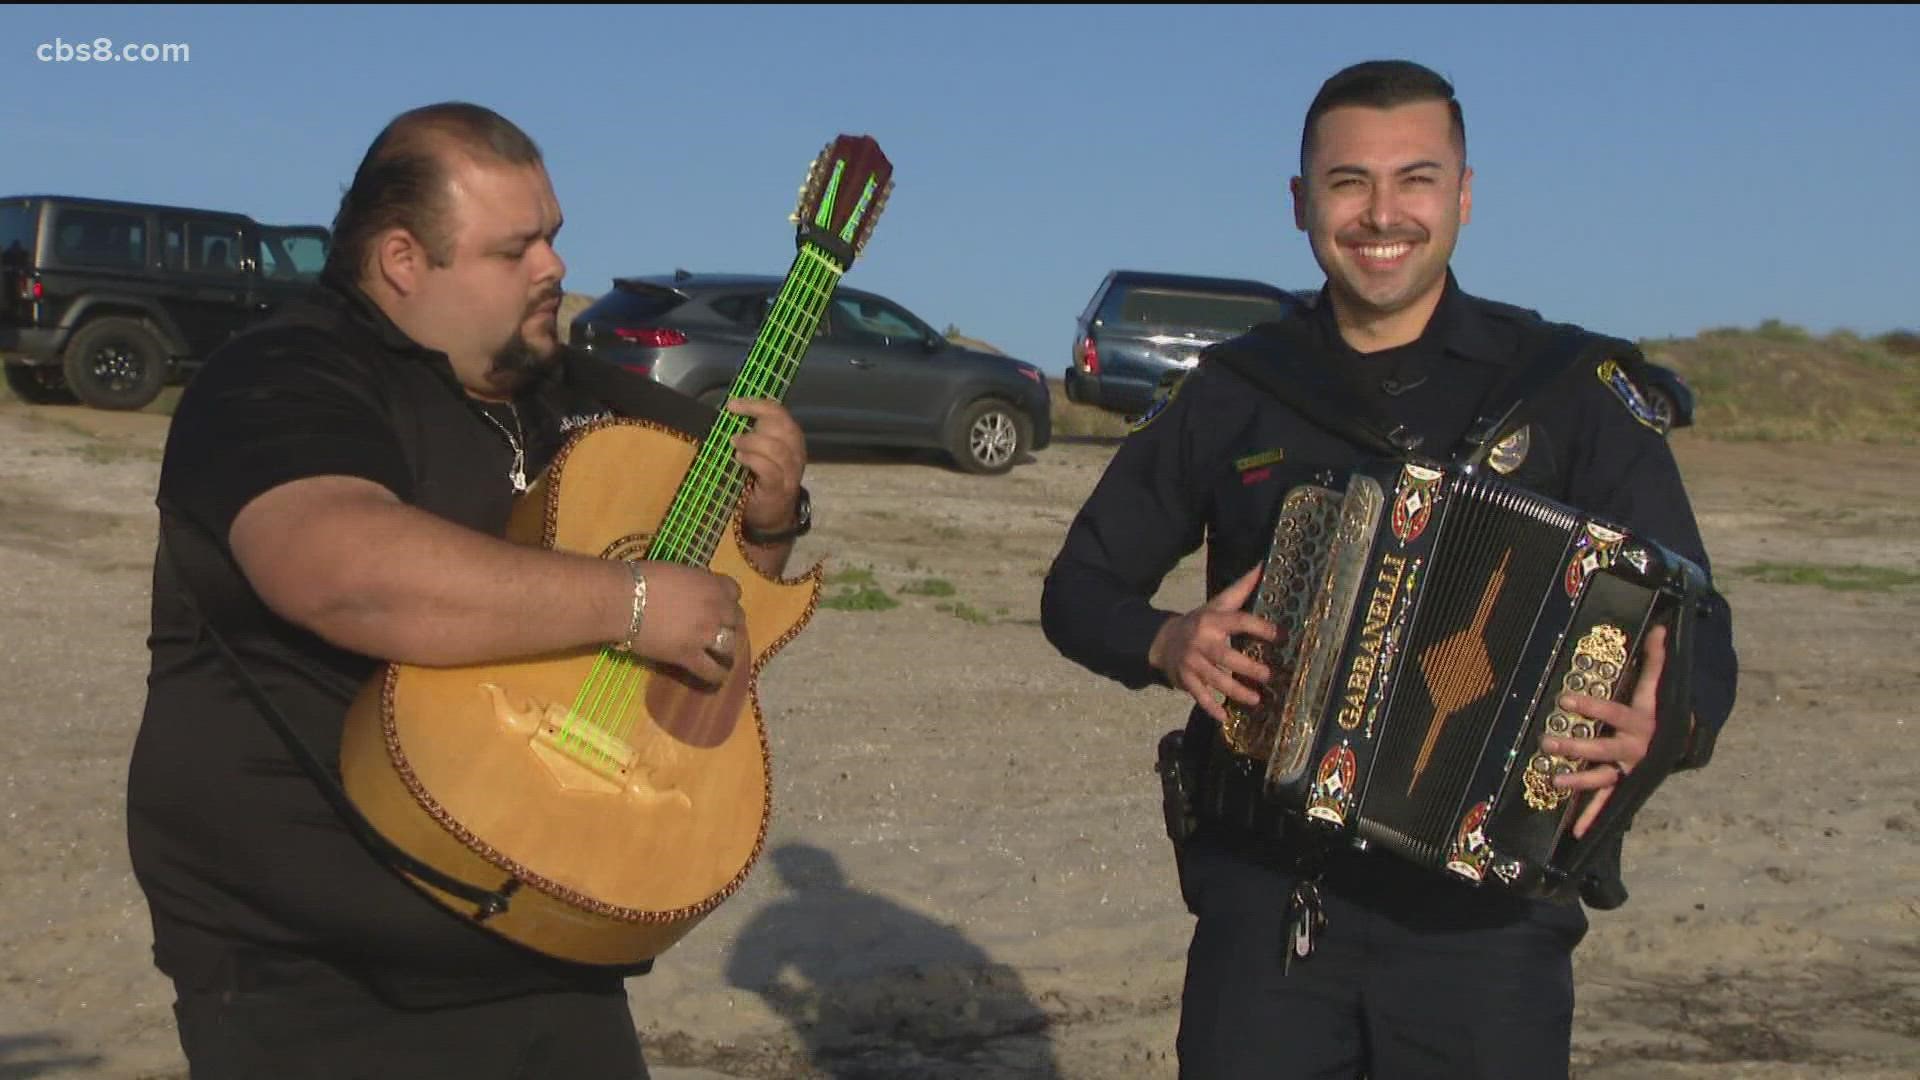 A nightly patrol on Fiesta Island turned into a viral moment, gaining over 650,000 views on TikTok.